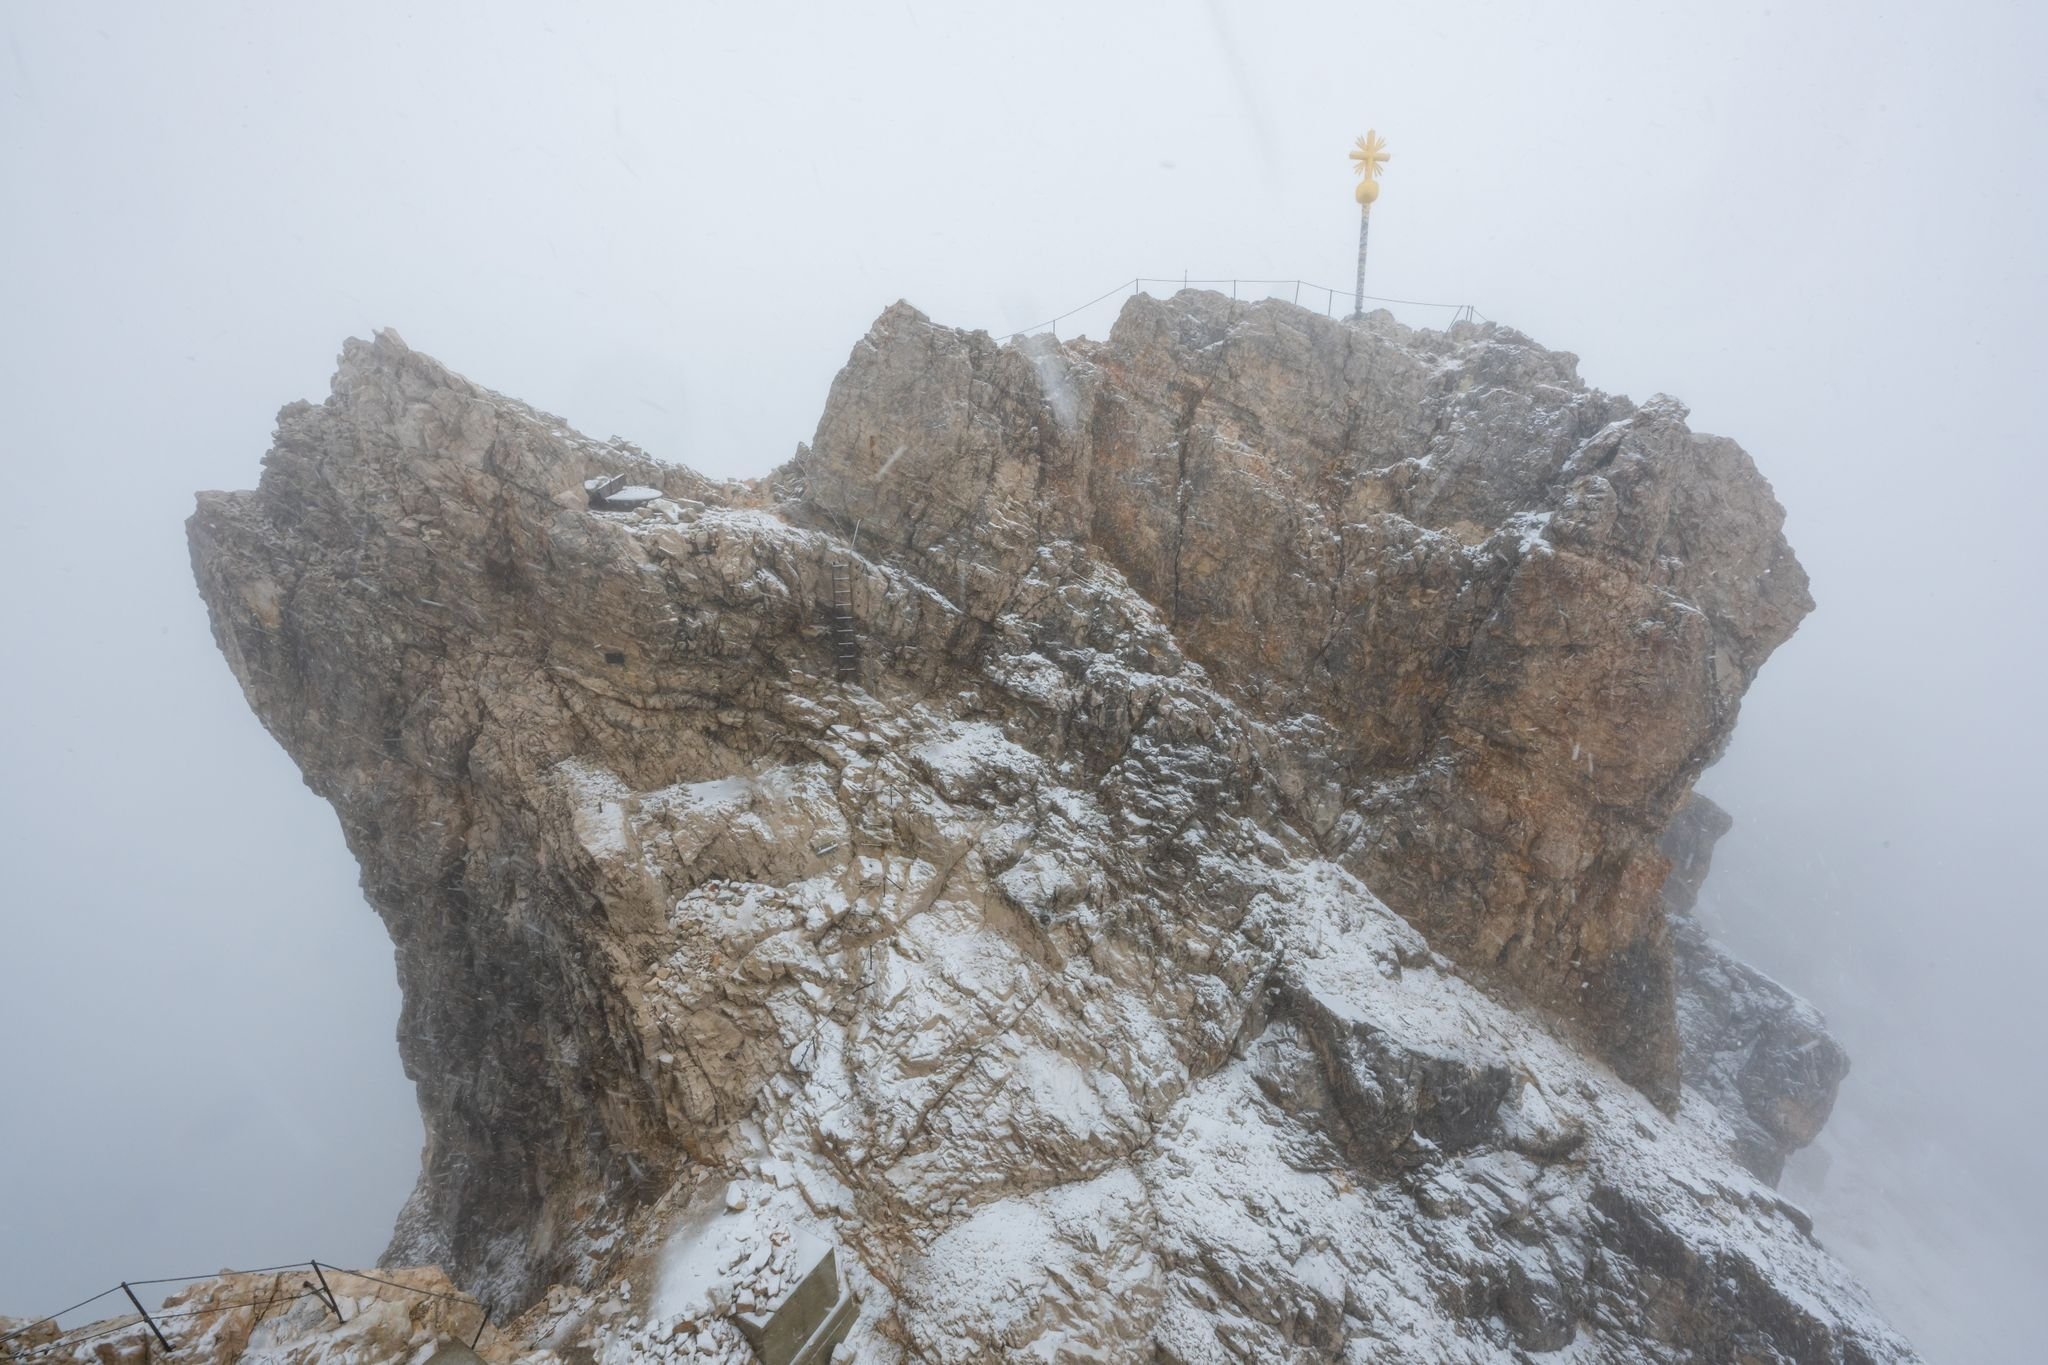 Mountaineers rescued from drifting snow on Zugspitze